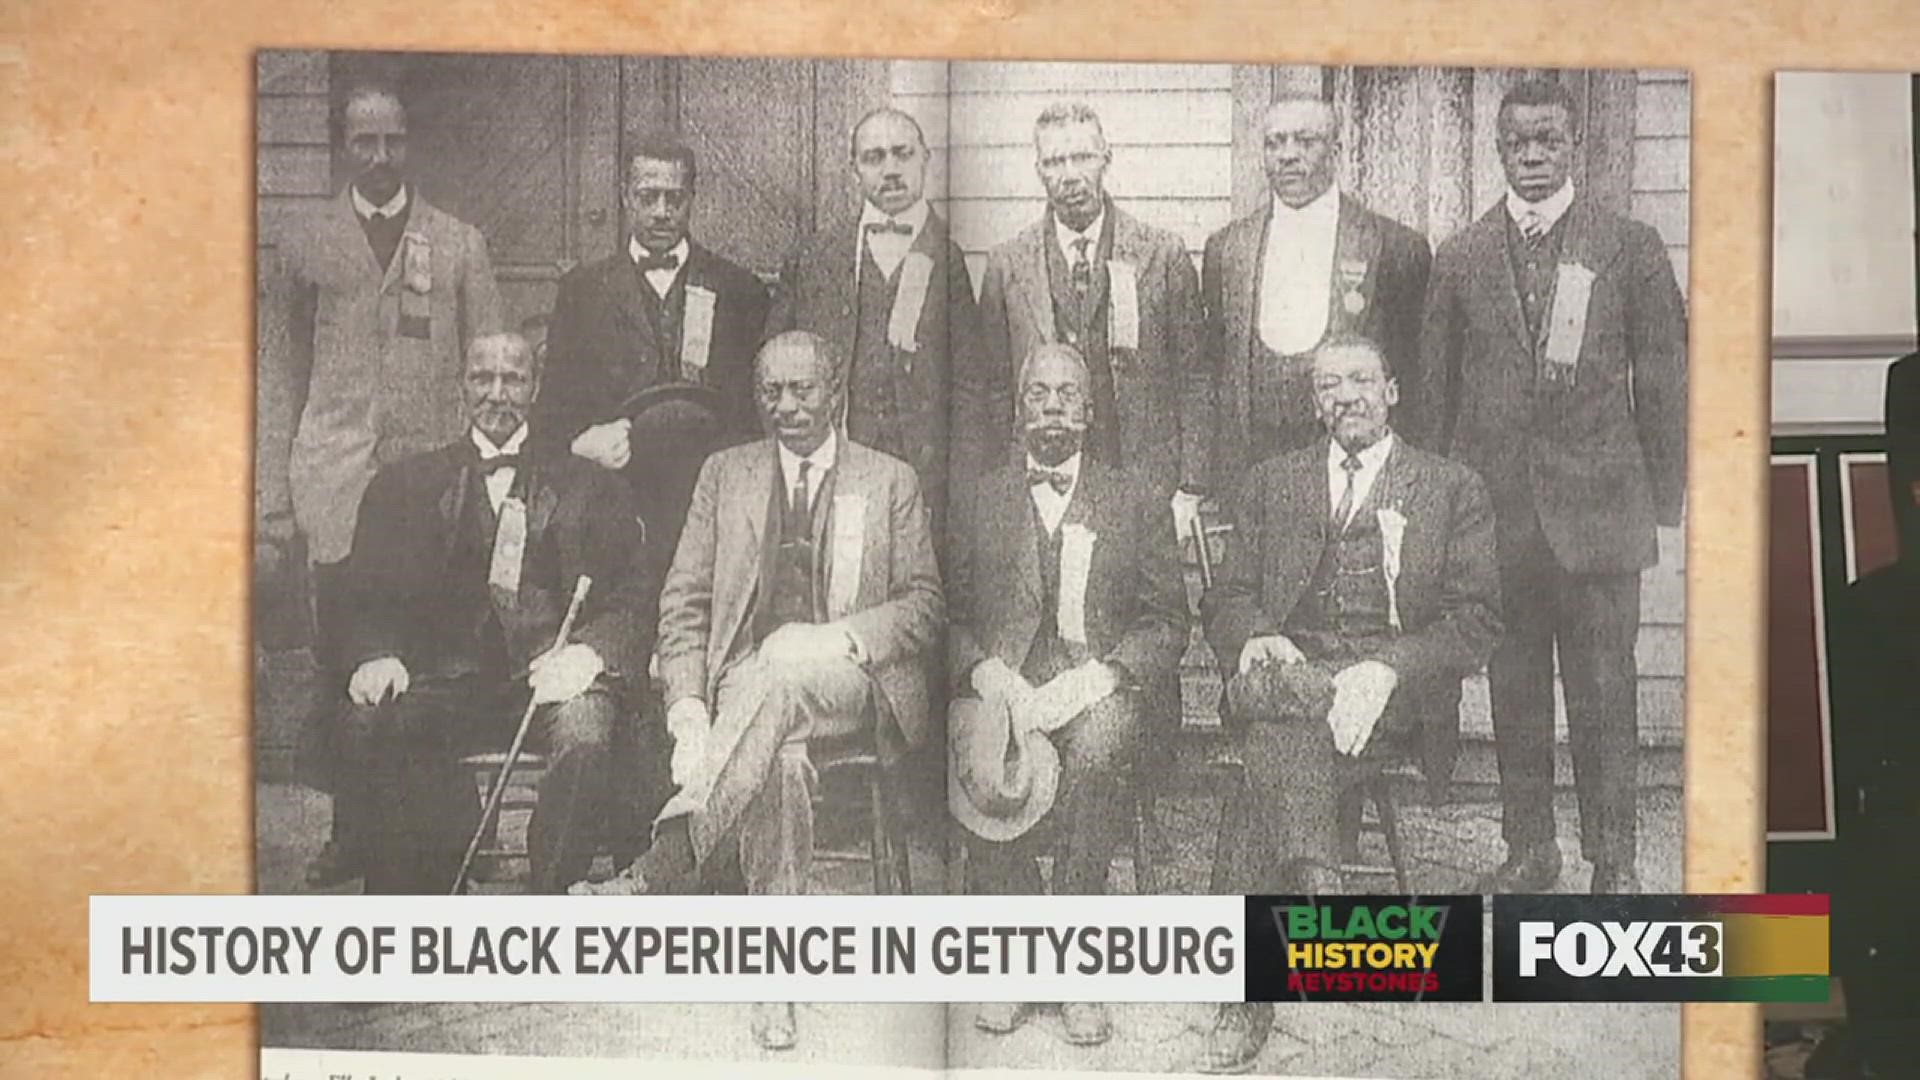 The Gettysburg Black History Museum is working to preserve history, tell stories that may have been forgotten or overlooked and educate all on Black history.